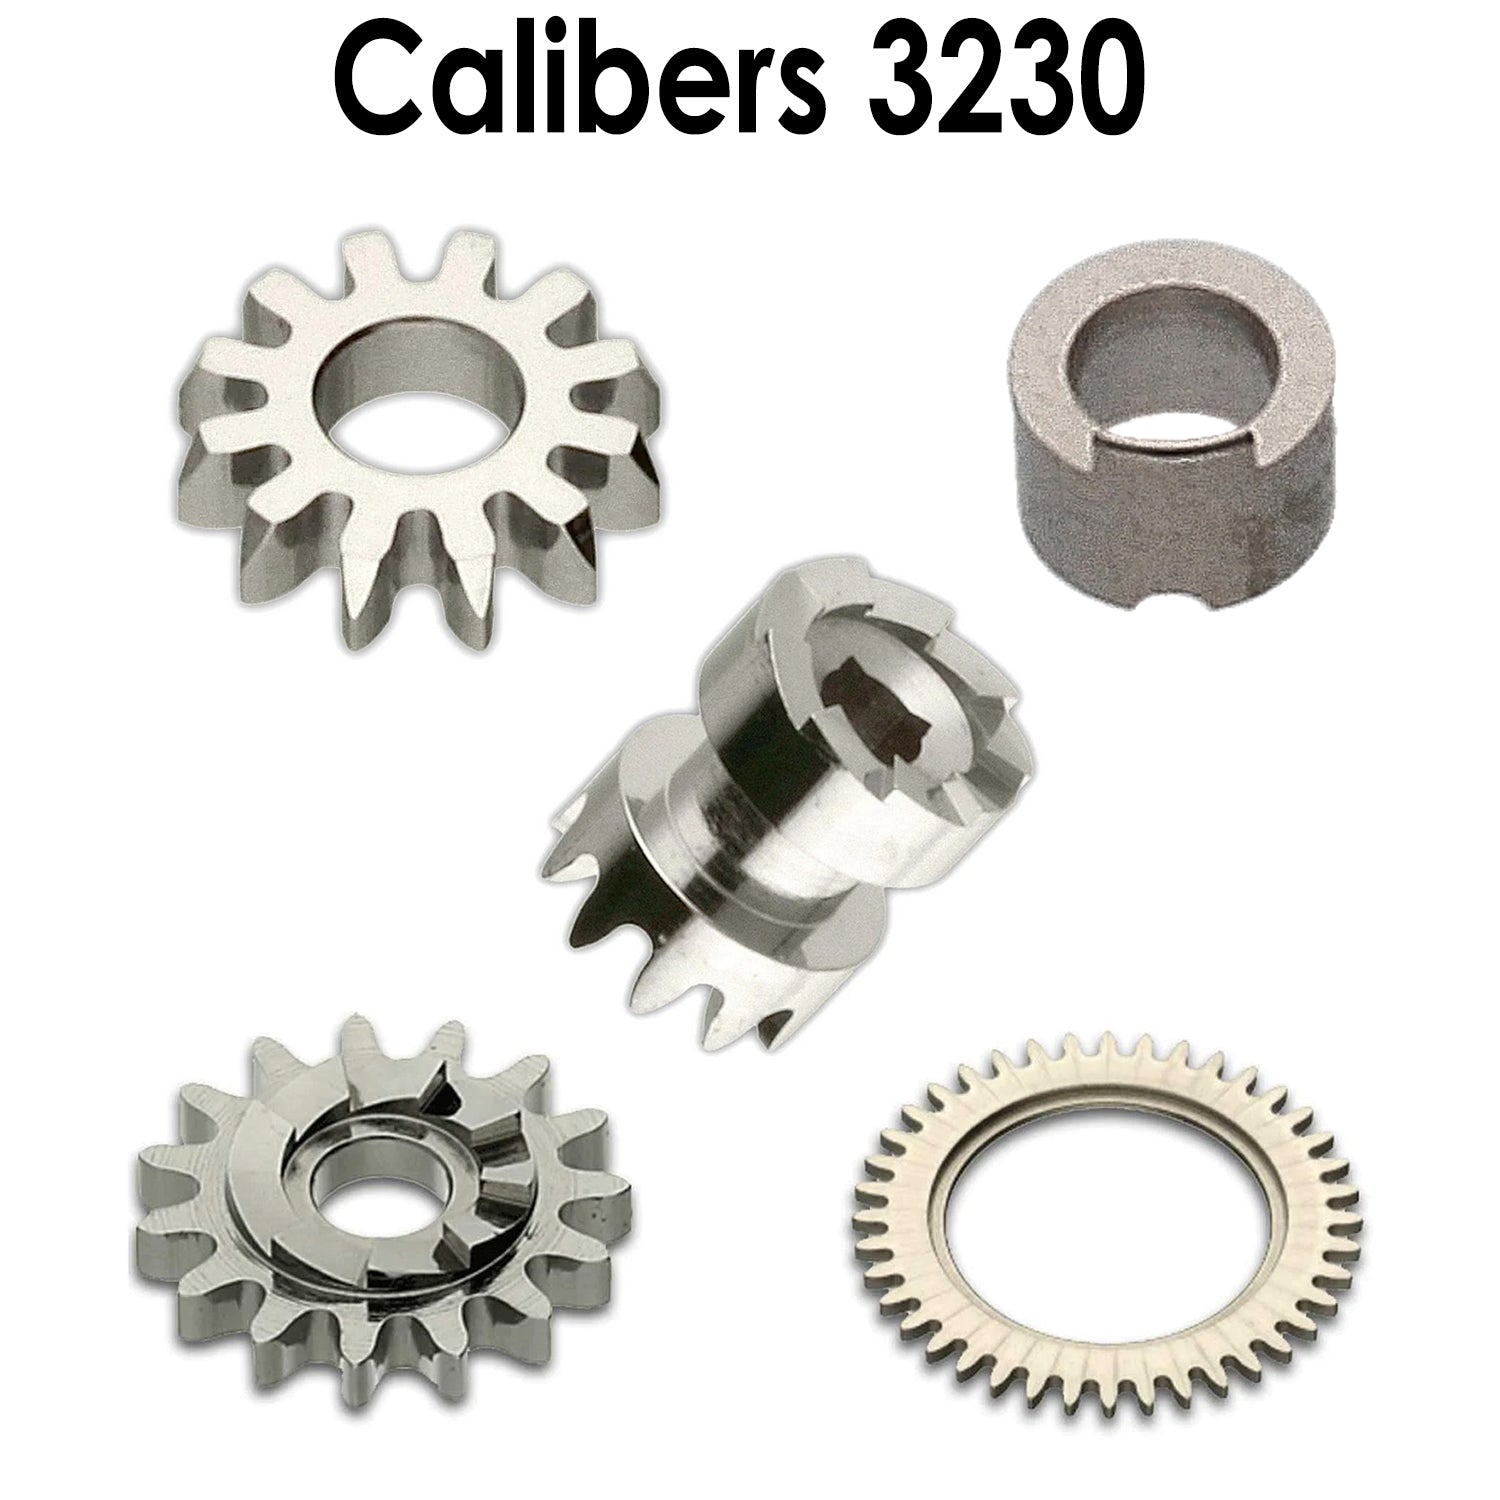 Internal Parts to fit Rolex 32 Series Calibers 3230, 3235, 3255